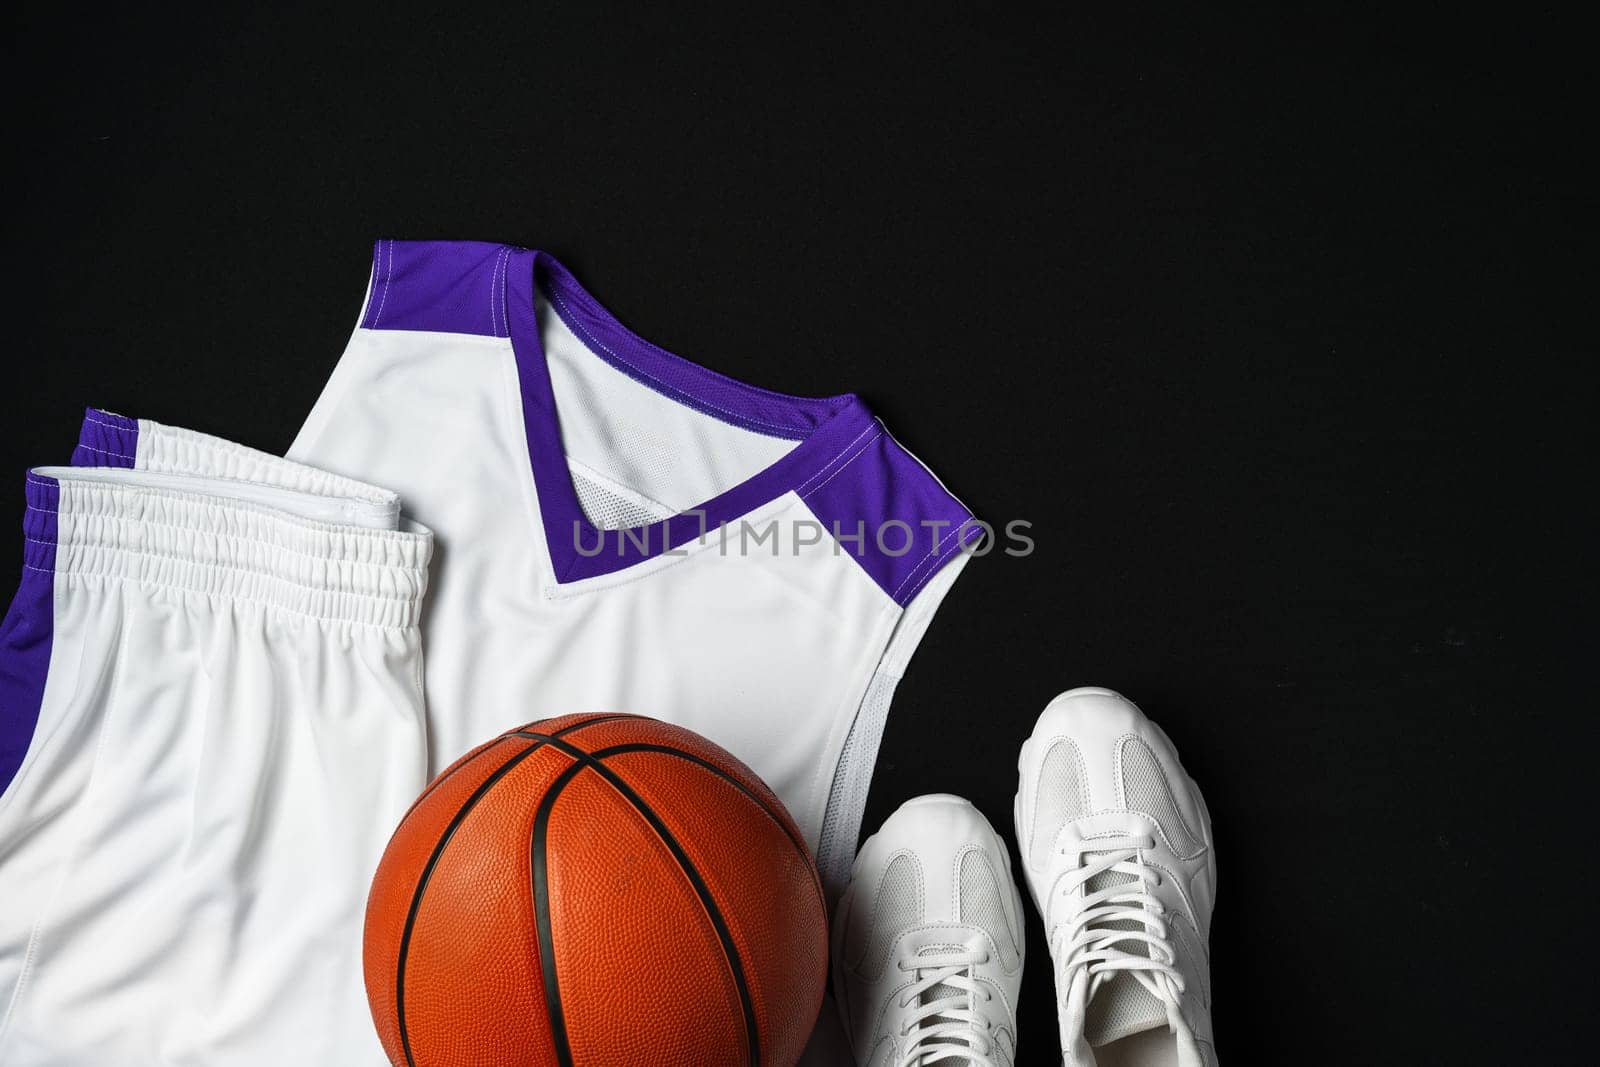 Basketball Outfit and Accessories Laid Out on Dark Background by Fabrikasimf